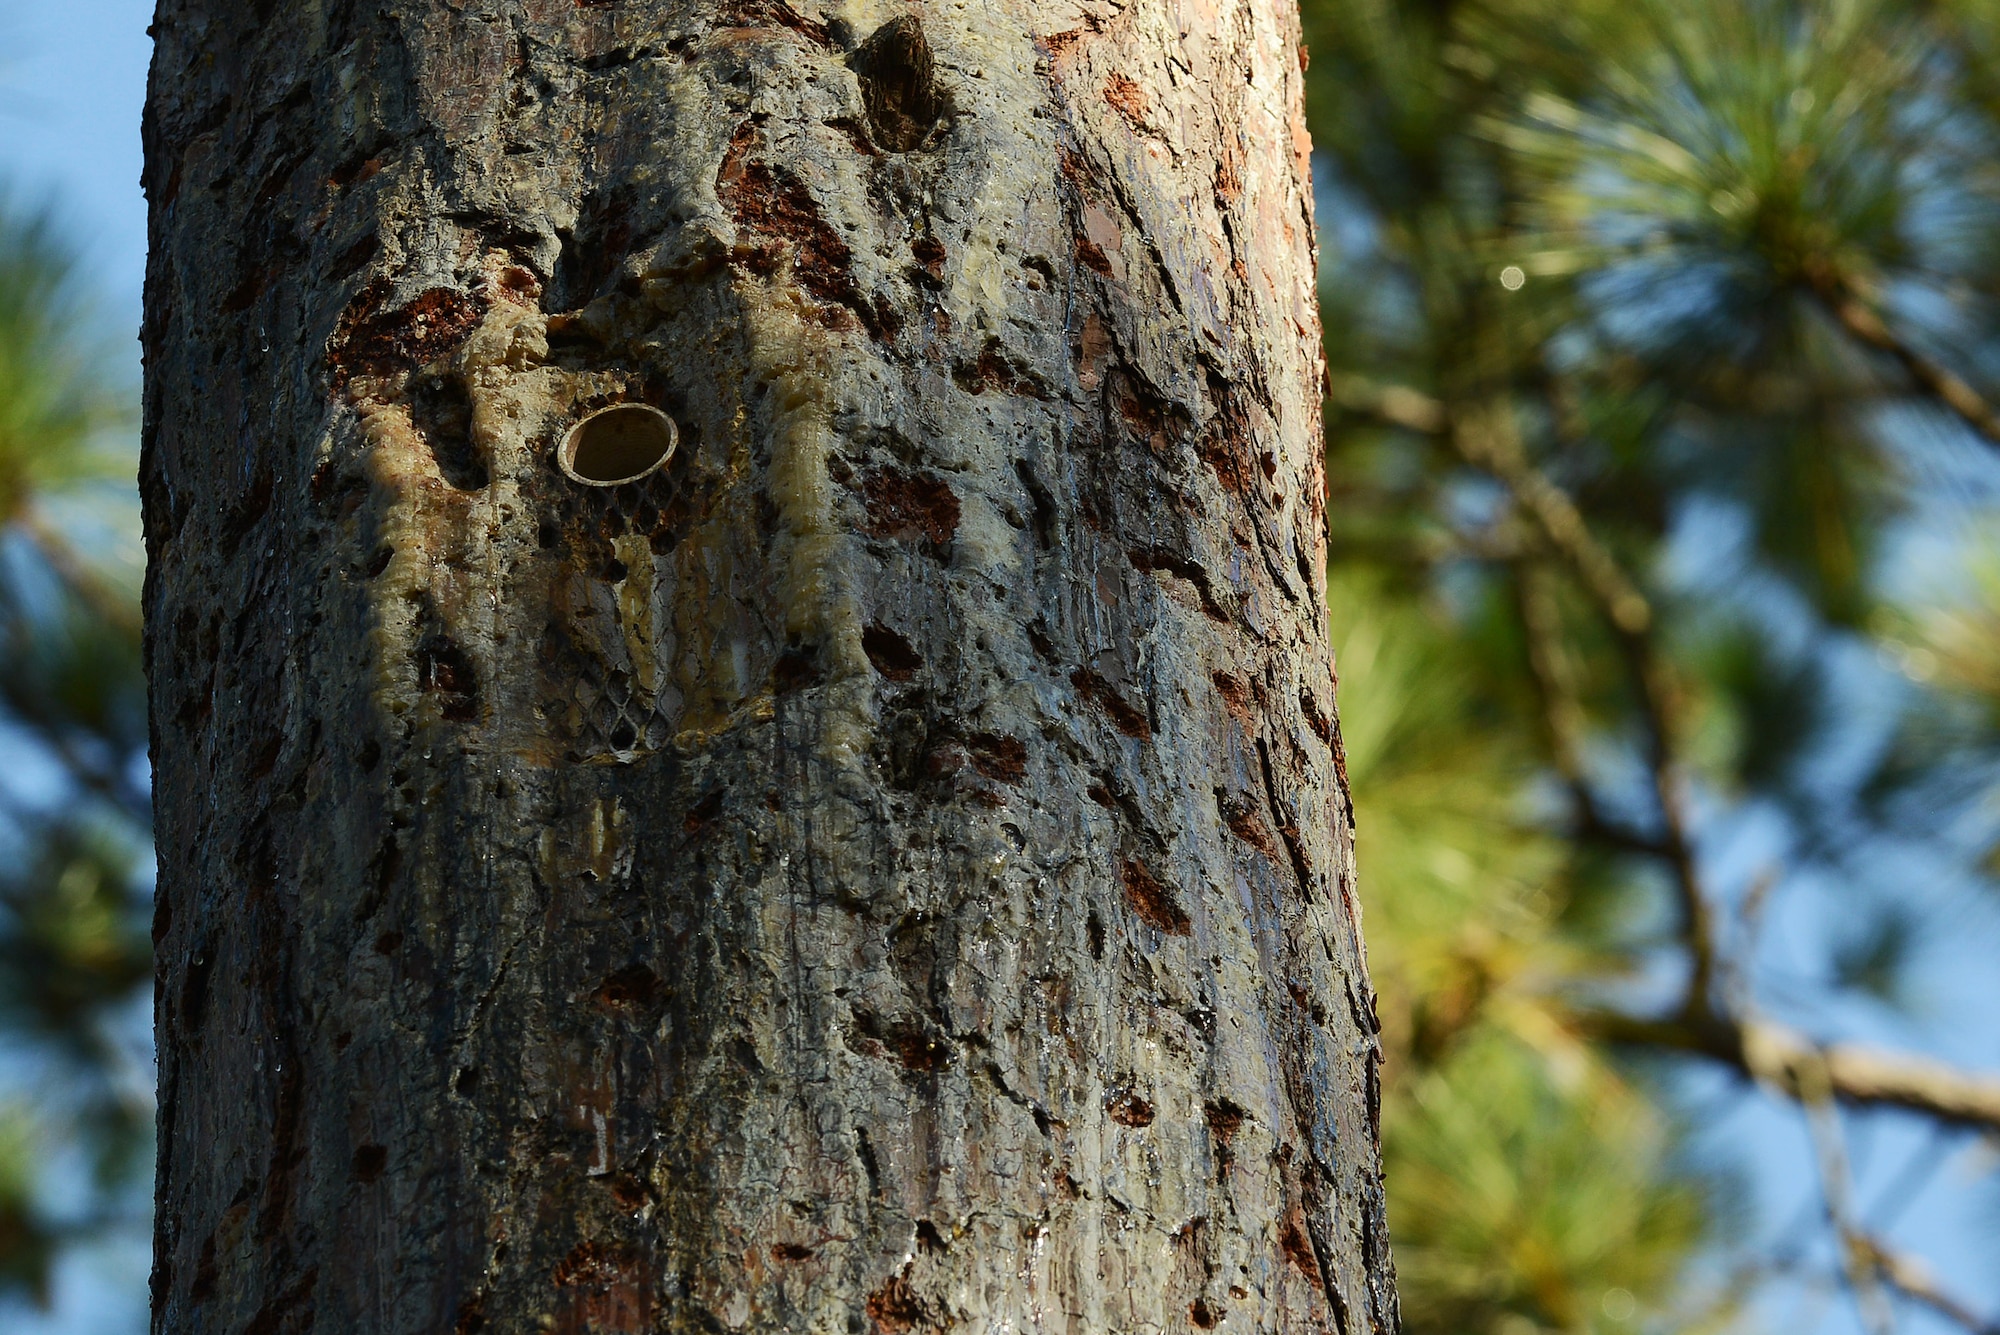 An artificial cavity was inserted into a Longleaf Pine tree at Poinsett Electronic Combat Range, Sumter, S.C., Oct. 28, 2014. The artificial cavity was created to assist the Red-cockaded Woodpeckers, an endangered bird, who normally excavate their nest cavity in living Longleaf Pine trees. (U.S. Air Force photo by Airman 1st Class Diana M. Cossaboom/Released)